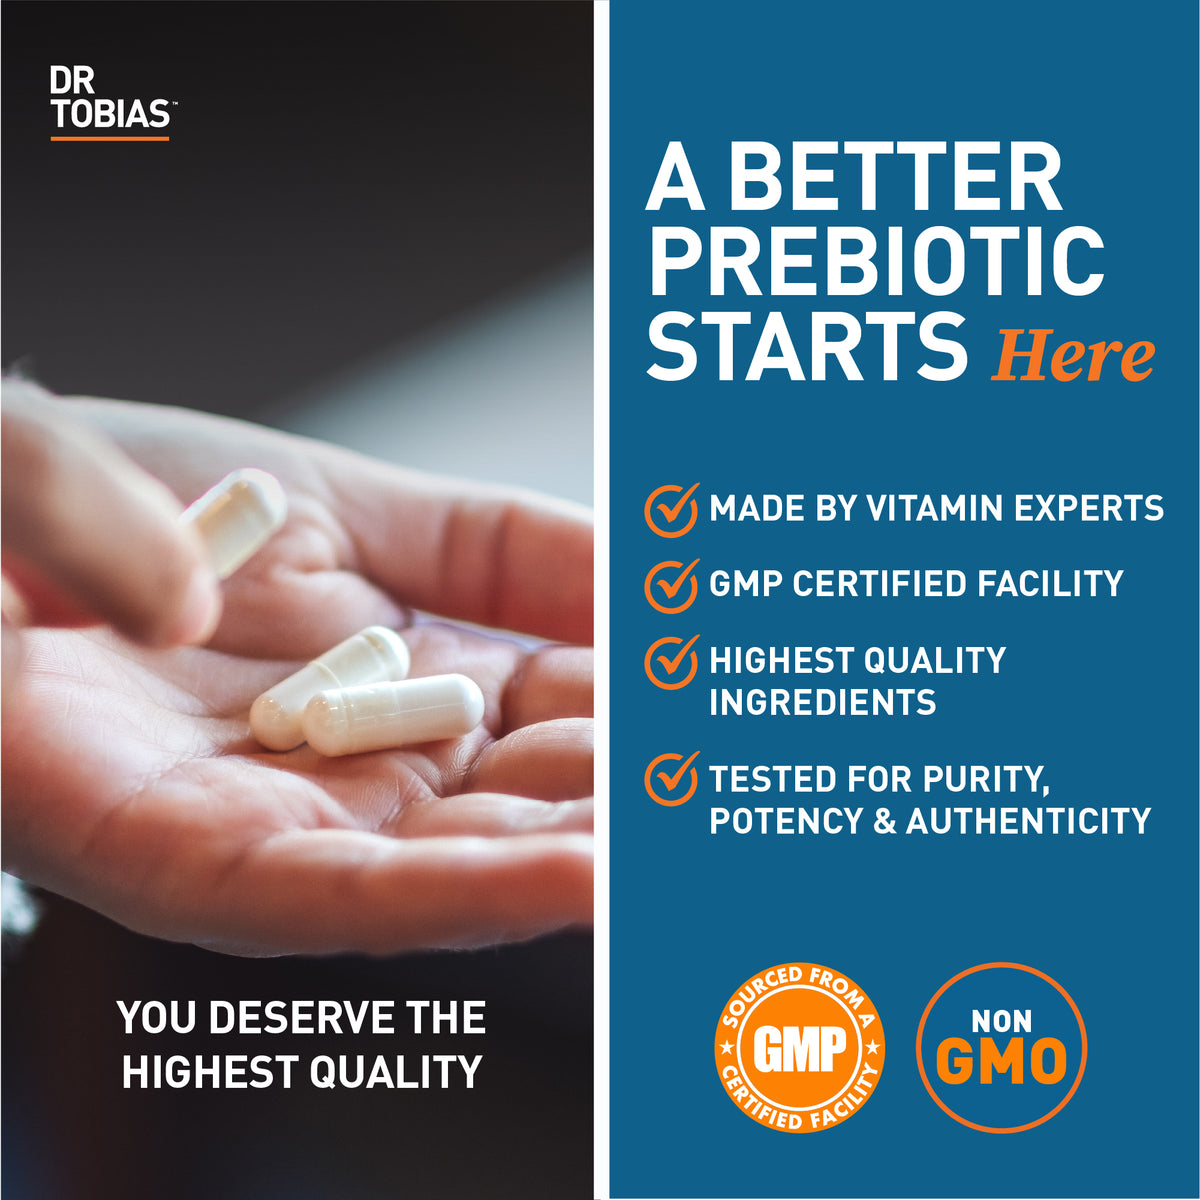 a better prebiotic starts here. Made by vitamin experts, GMP certified facility, highest quality ingredients, and tested for purity, potency and authenticity. 